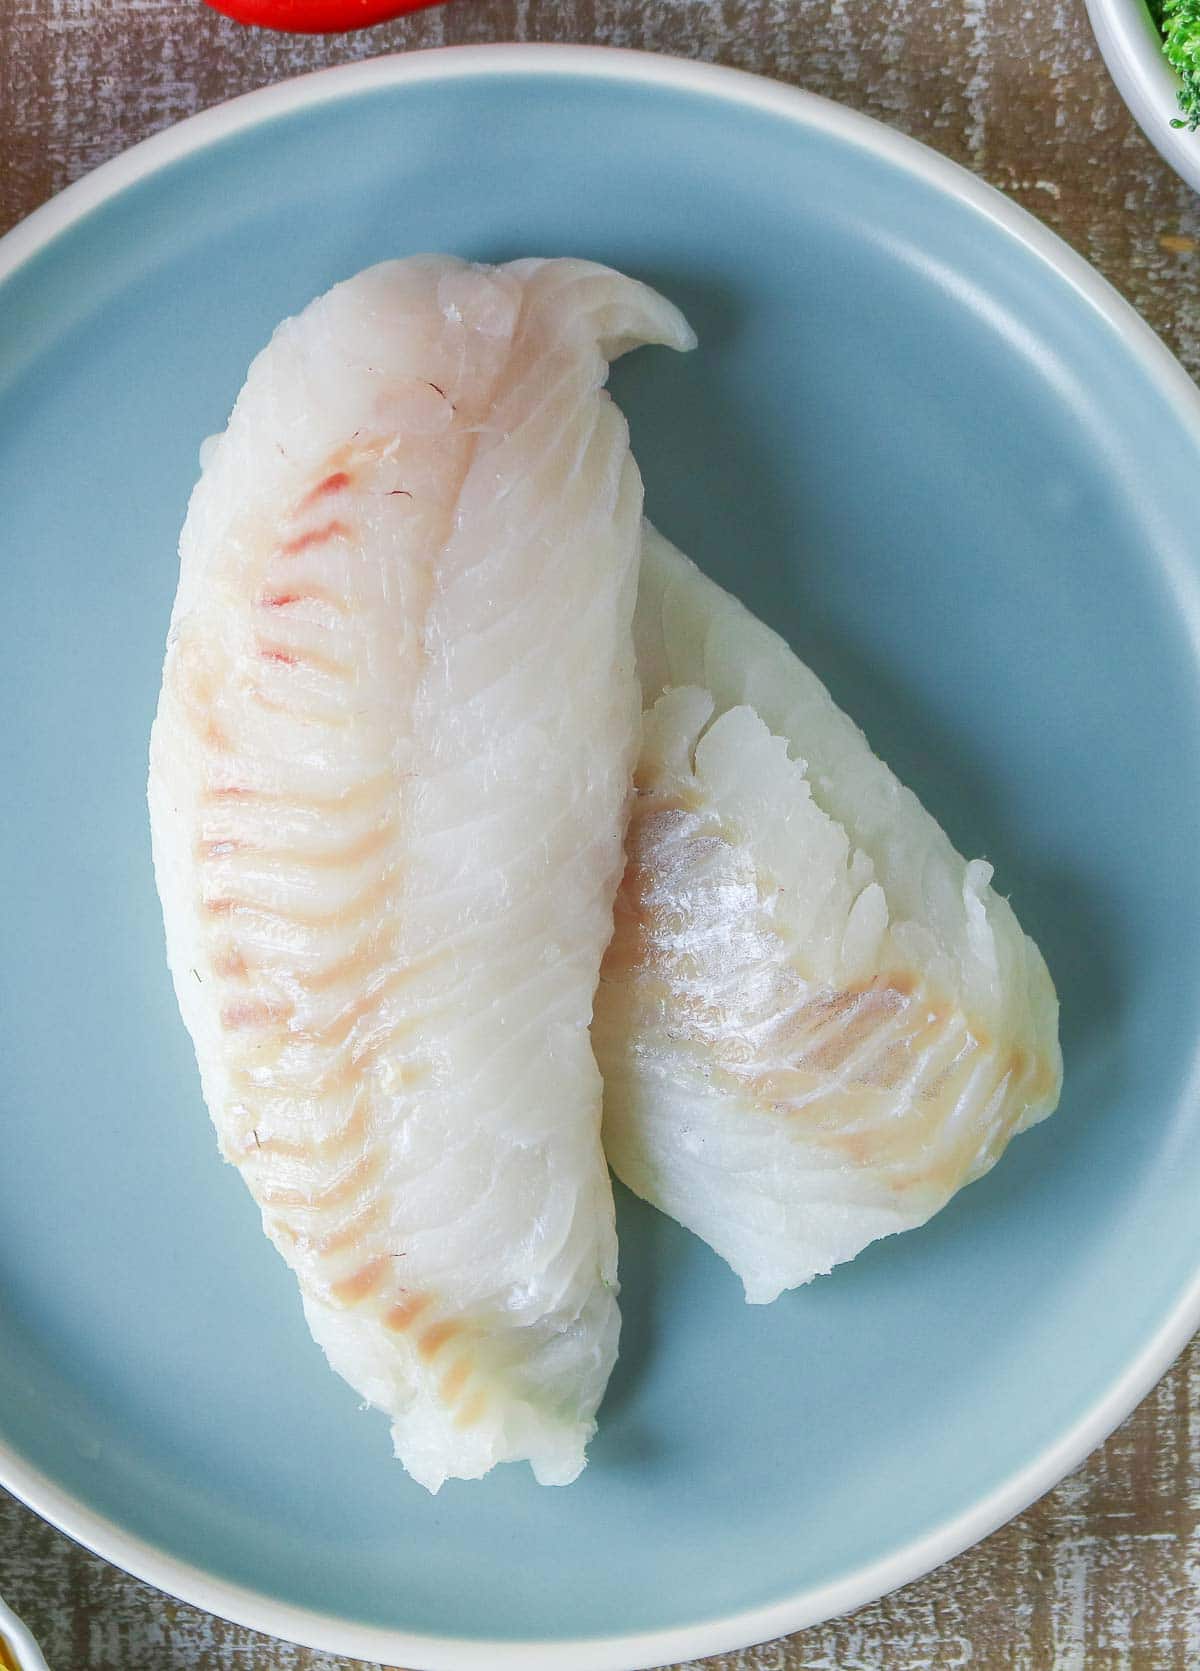 Two large uncooked cod fillets on a blue plate.